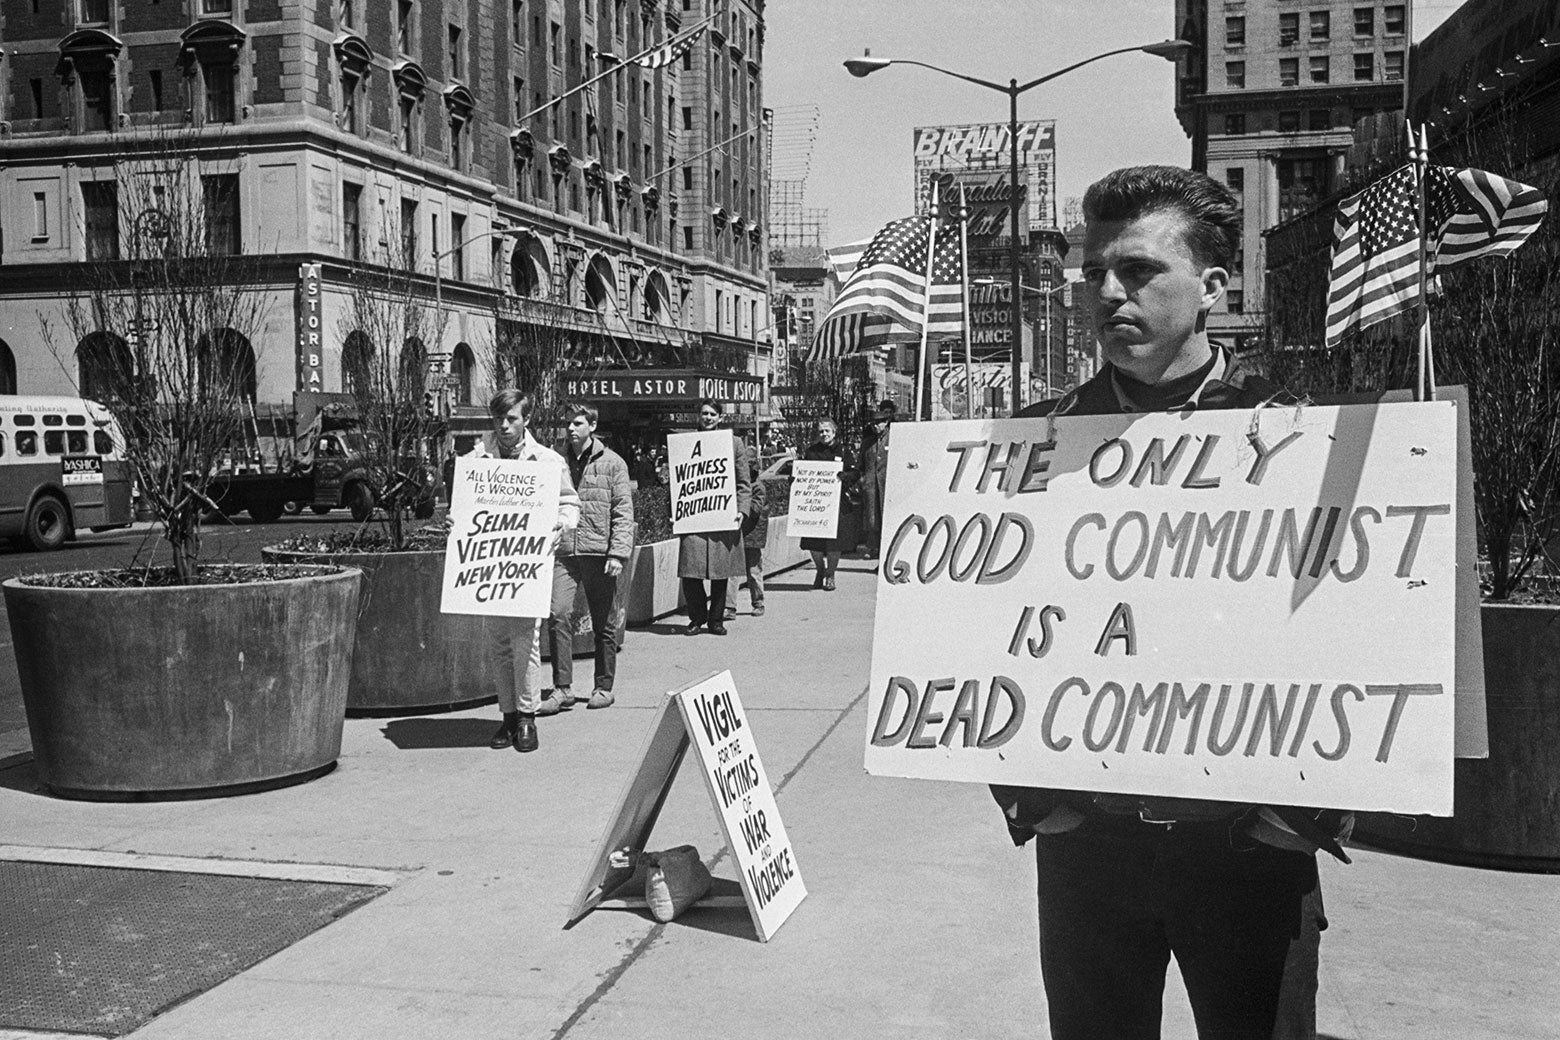 A man stands on a sidewalk wearing a sign that says "The only good Communist is a dead Communist" in front of antiwar protesters wearing signs that say "A witness against brutality" and "All violence is wrong: Selma Vietnam New York City"